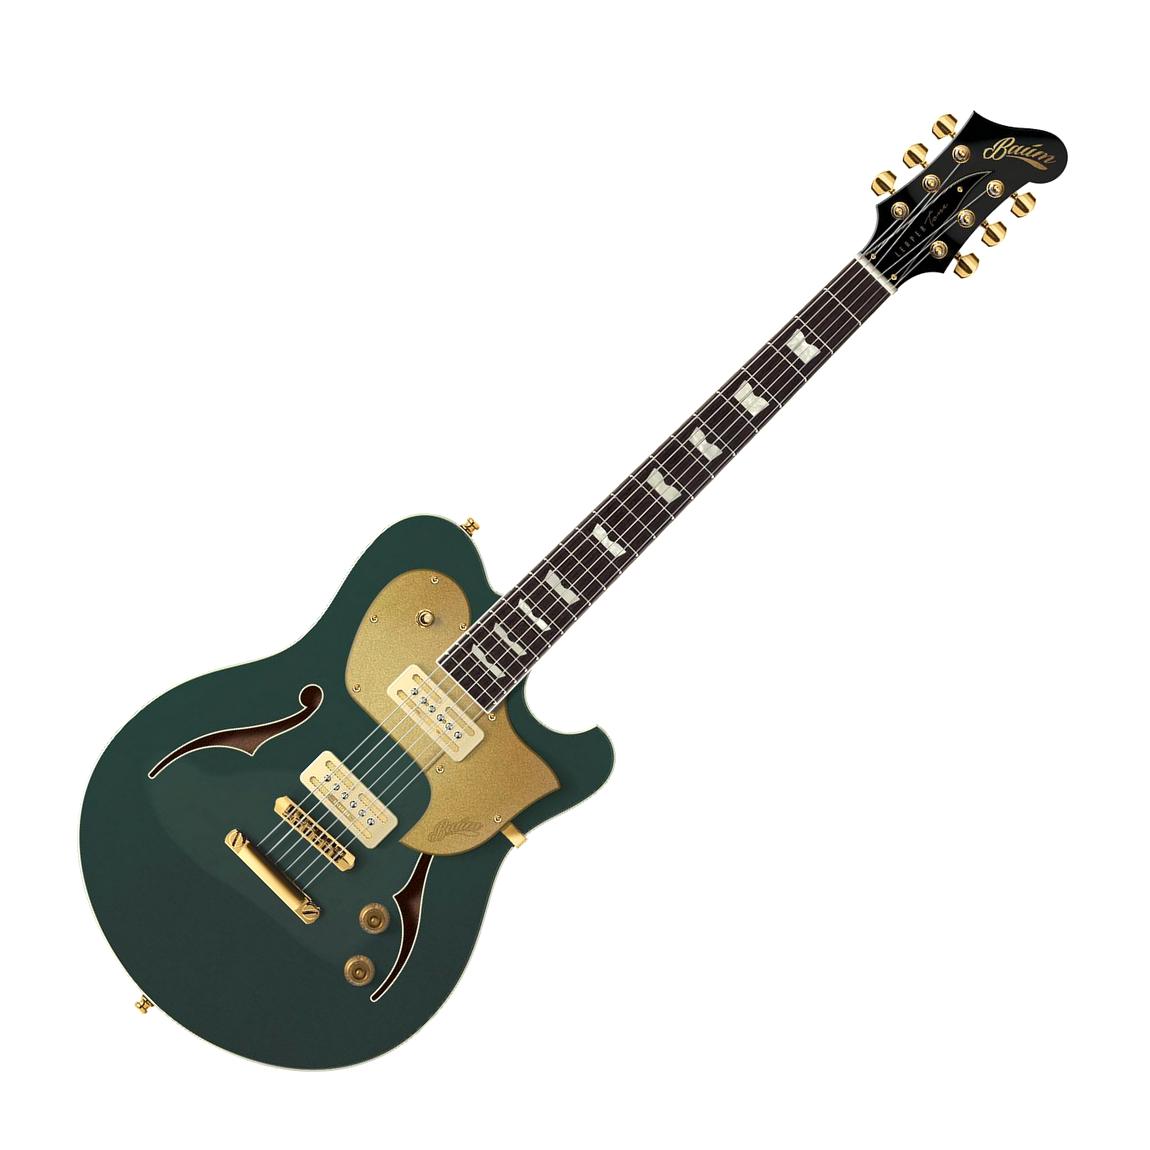 Baum Guitars Leaper Tone Limited Series Electric Guitar w/Hardshell Case, Deep Forest Green